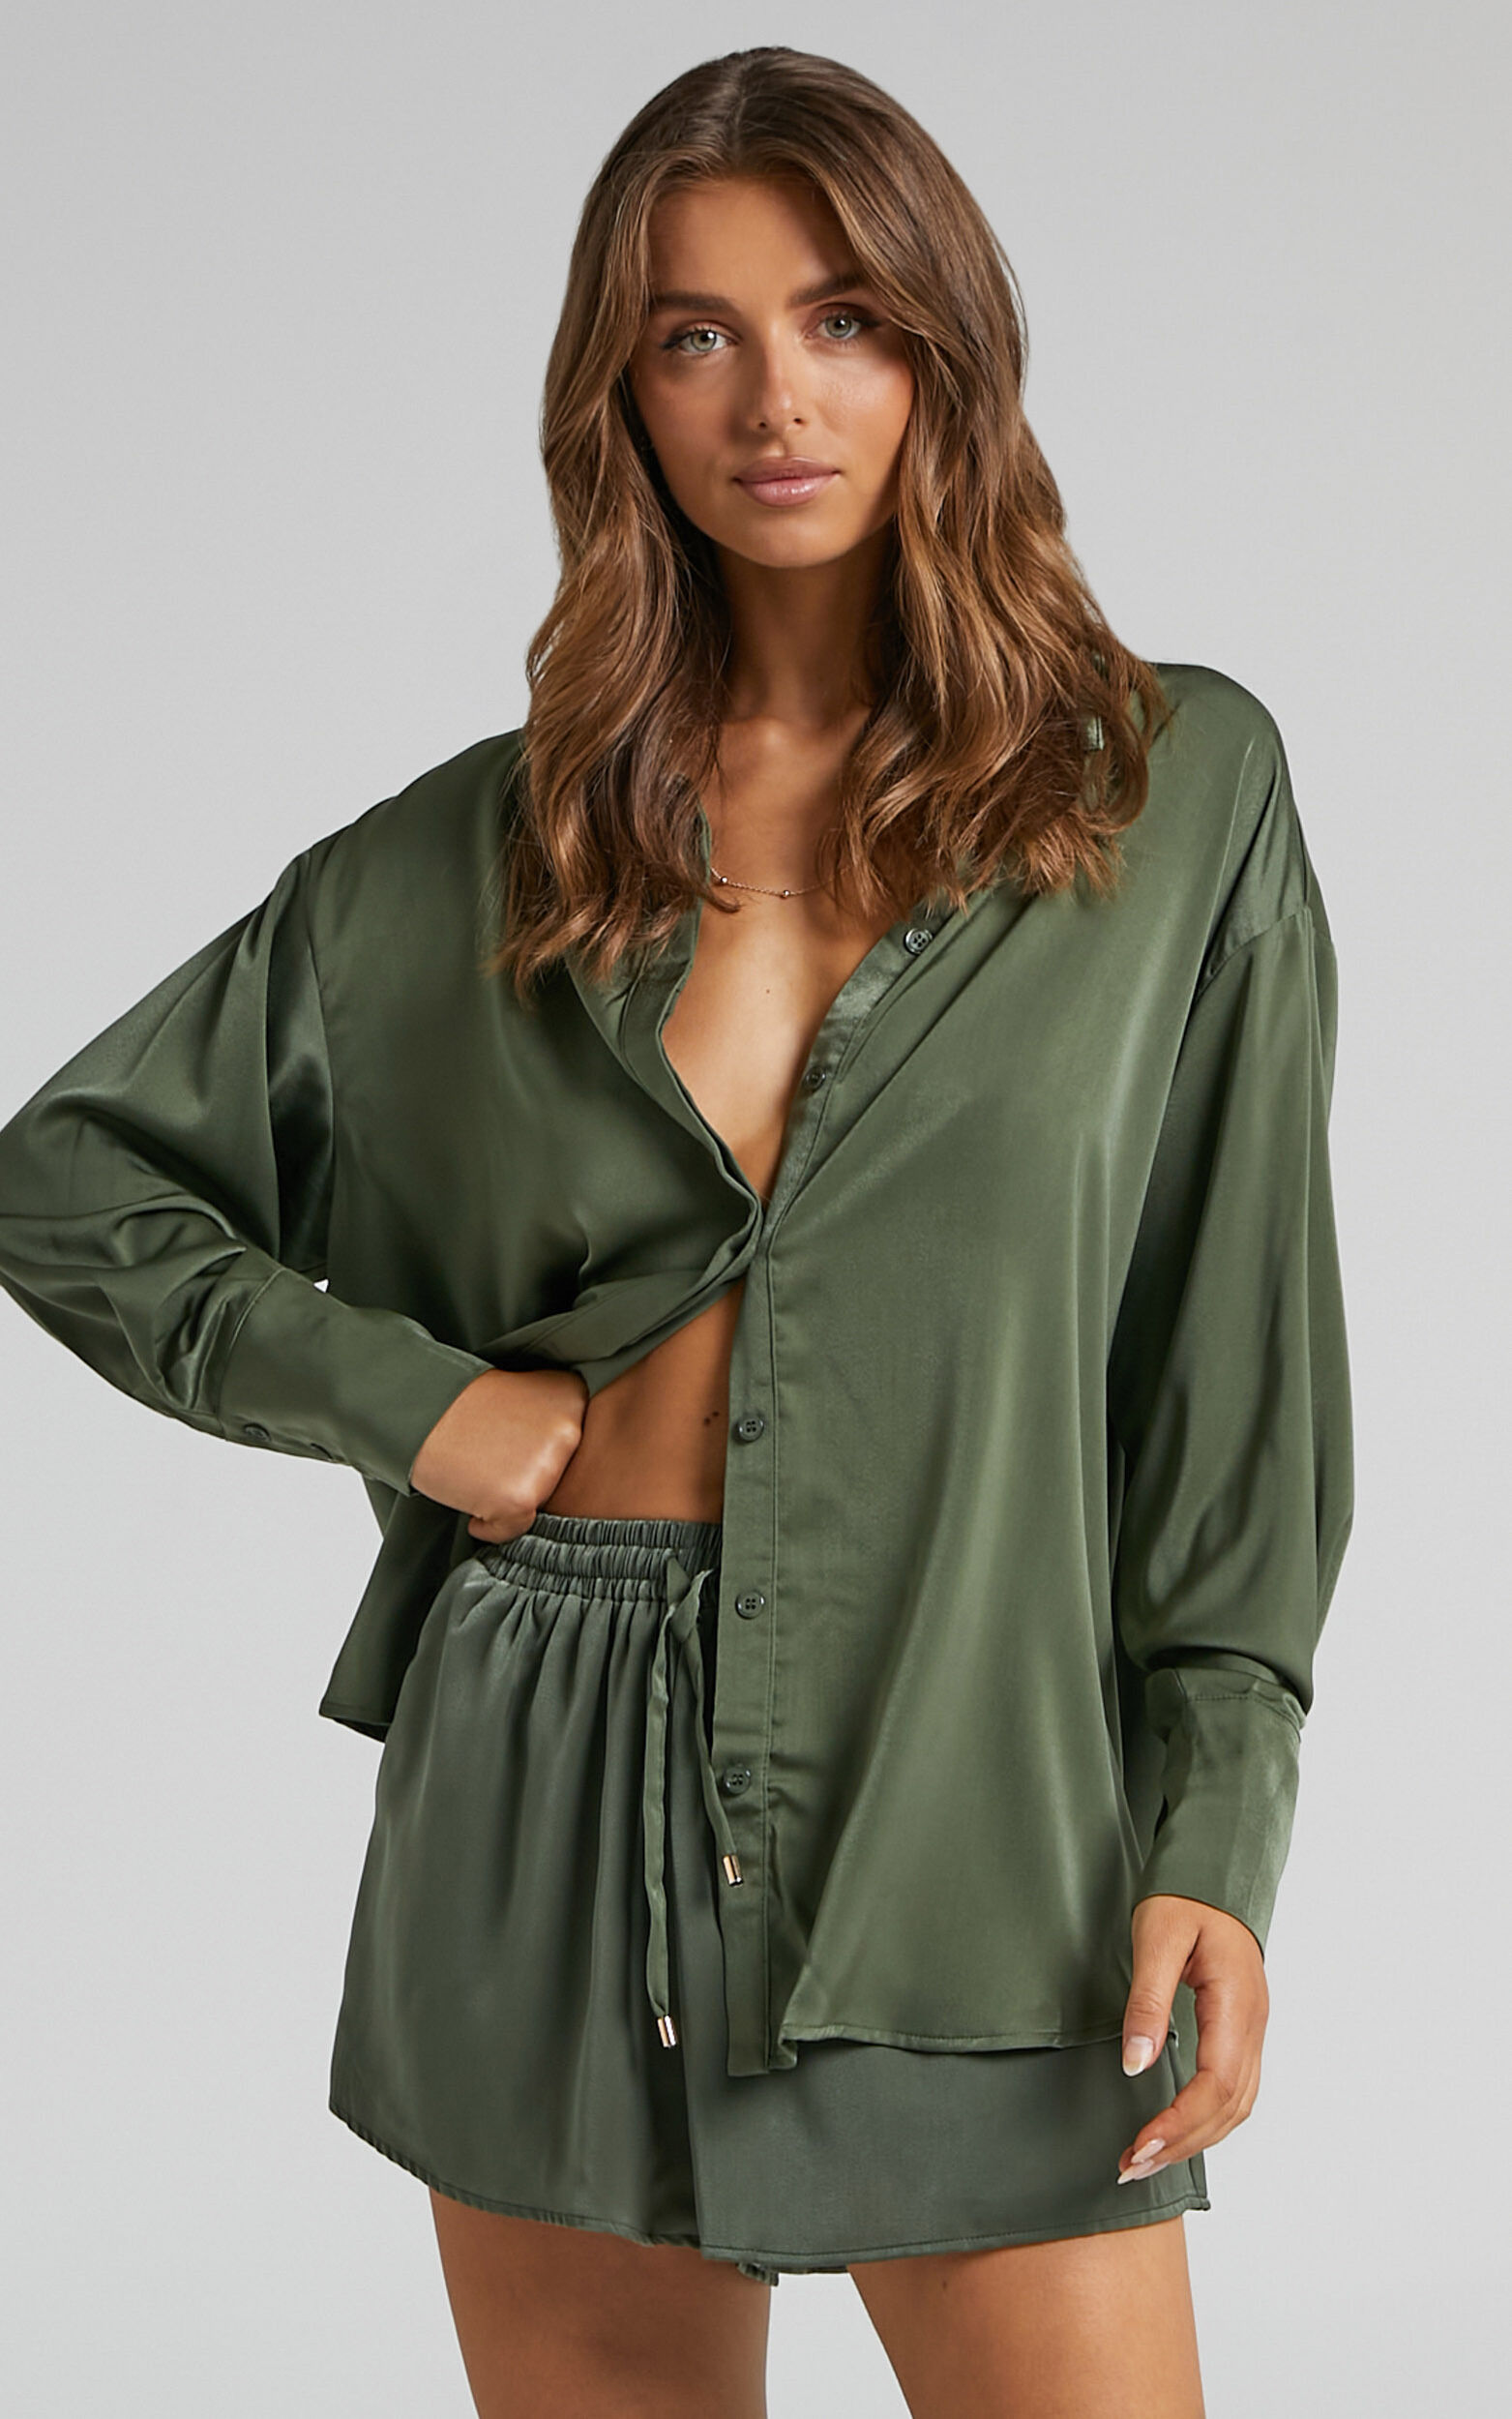 Azurine Shirt - Oversized Button Up Shirt in Olive - 06, GRN3